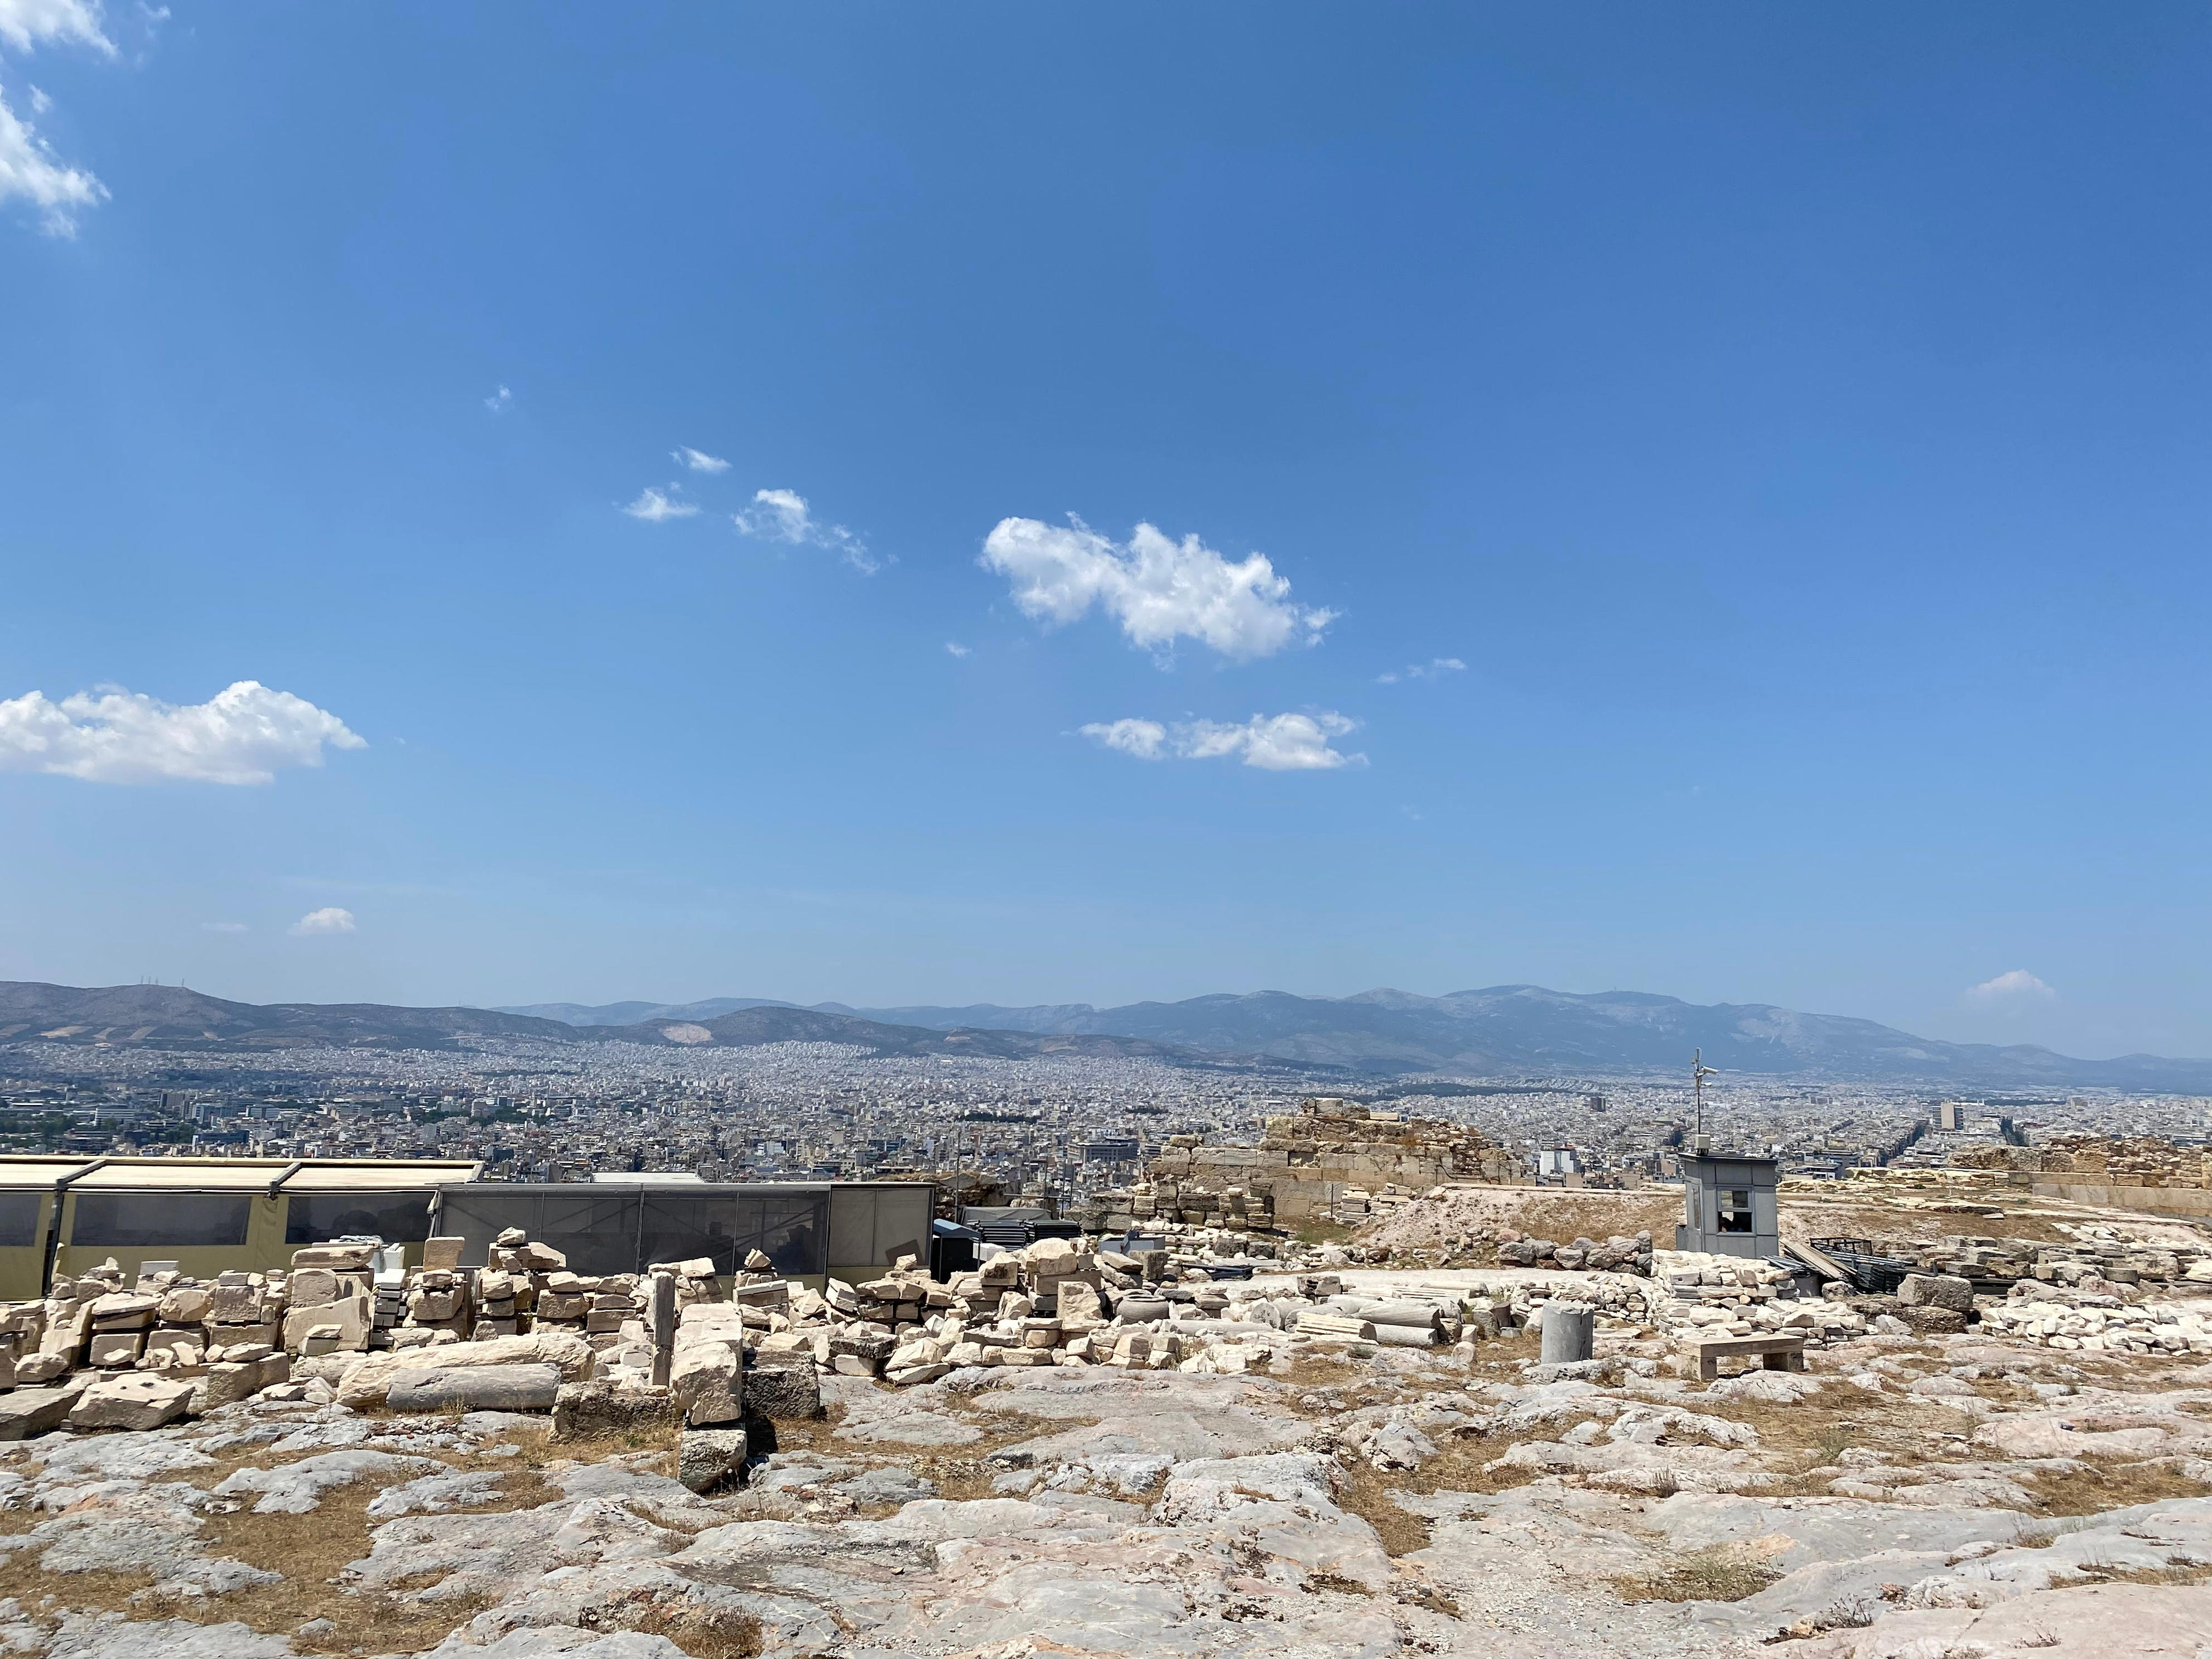 <p>Athens was extremely hot in the middle of May, and walking around the Acropolis was a challenging feat.</p><p>We had to take many breaks, and I think I nearly passed out from dehydration. Plastic <a href="https://www.businessinsider.com/how-to-pack-for-disney-according-to-vacation-planner-2022-1">water bottles</a> were expensive, so it would've been nice if we'd packed our own to fill up.</p>